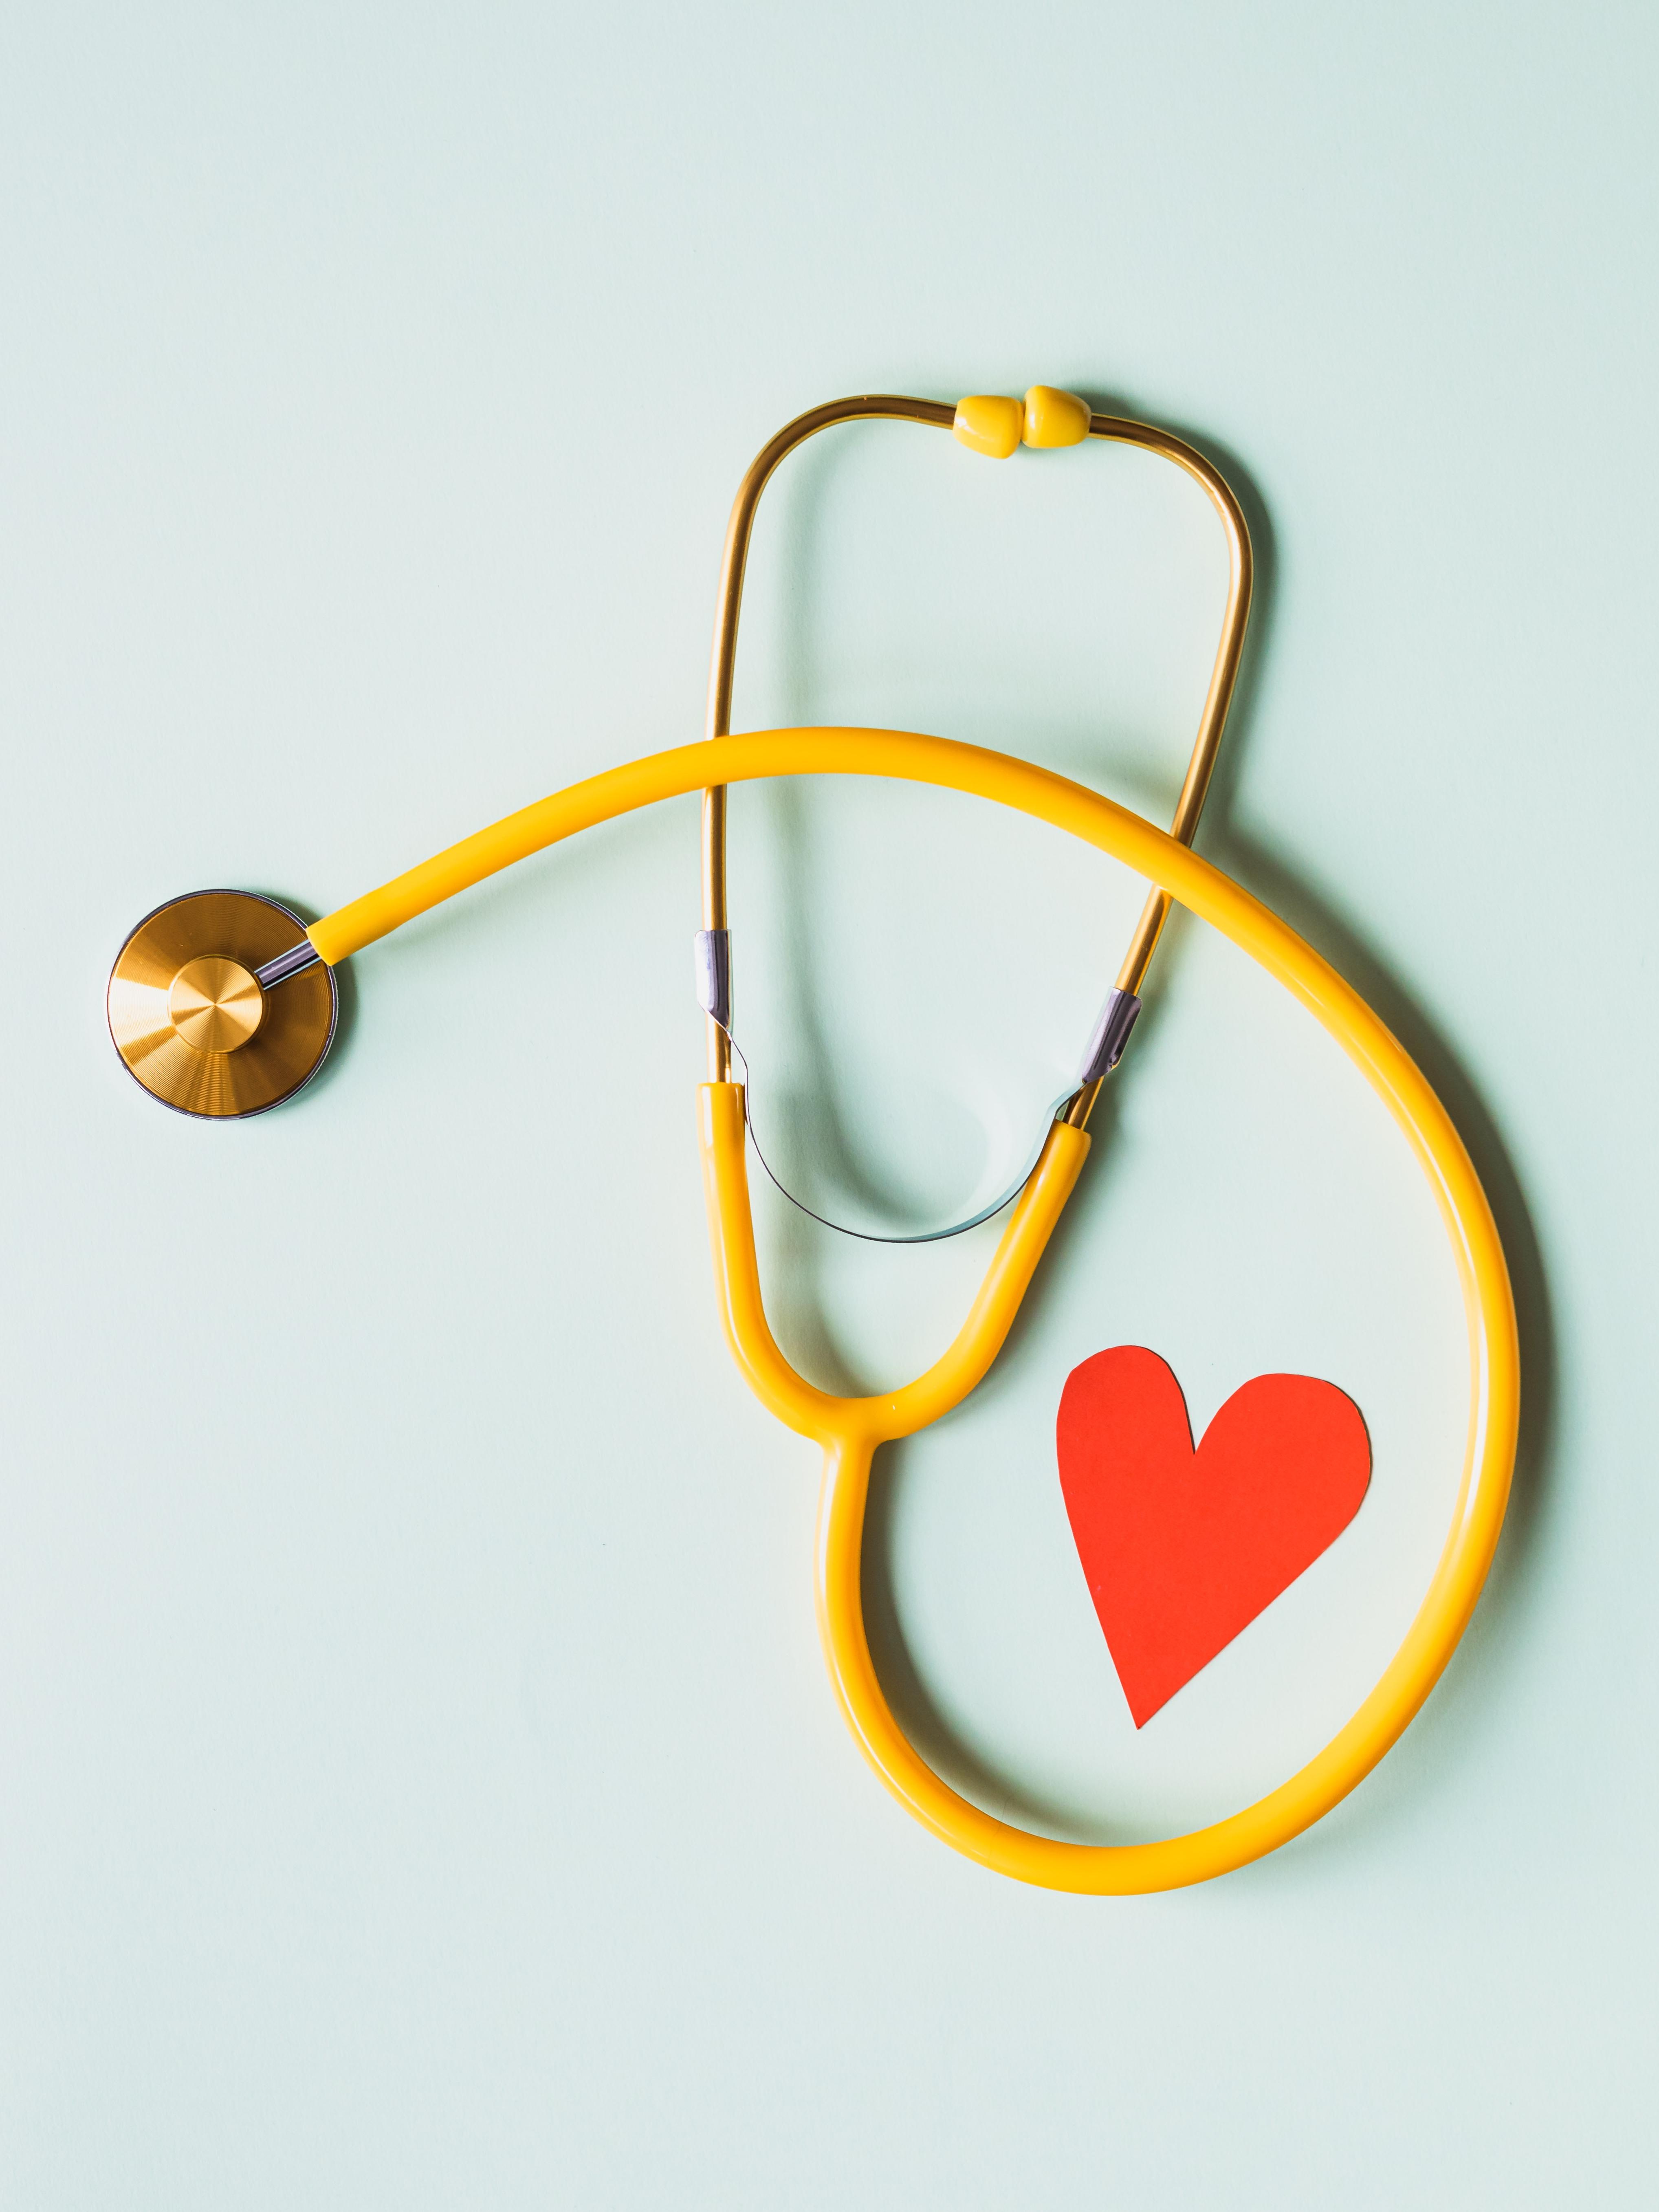 photo of a stethoscope and red heart